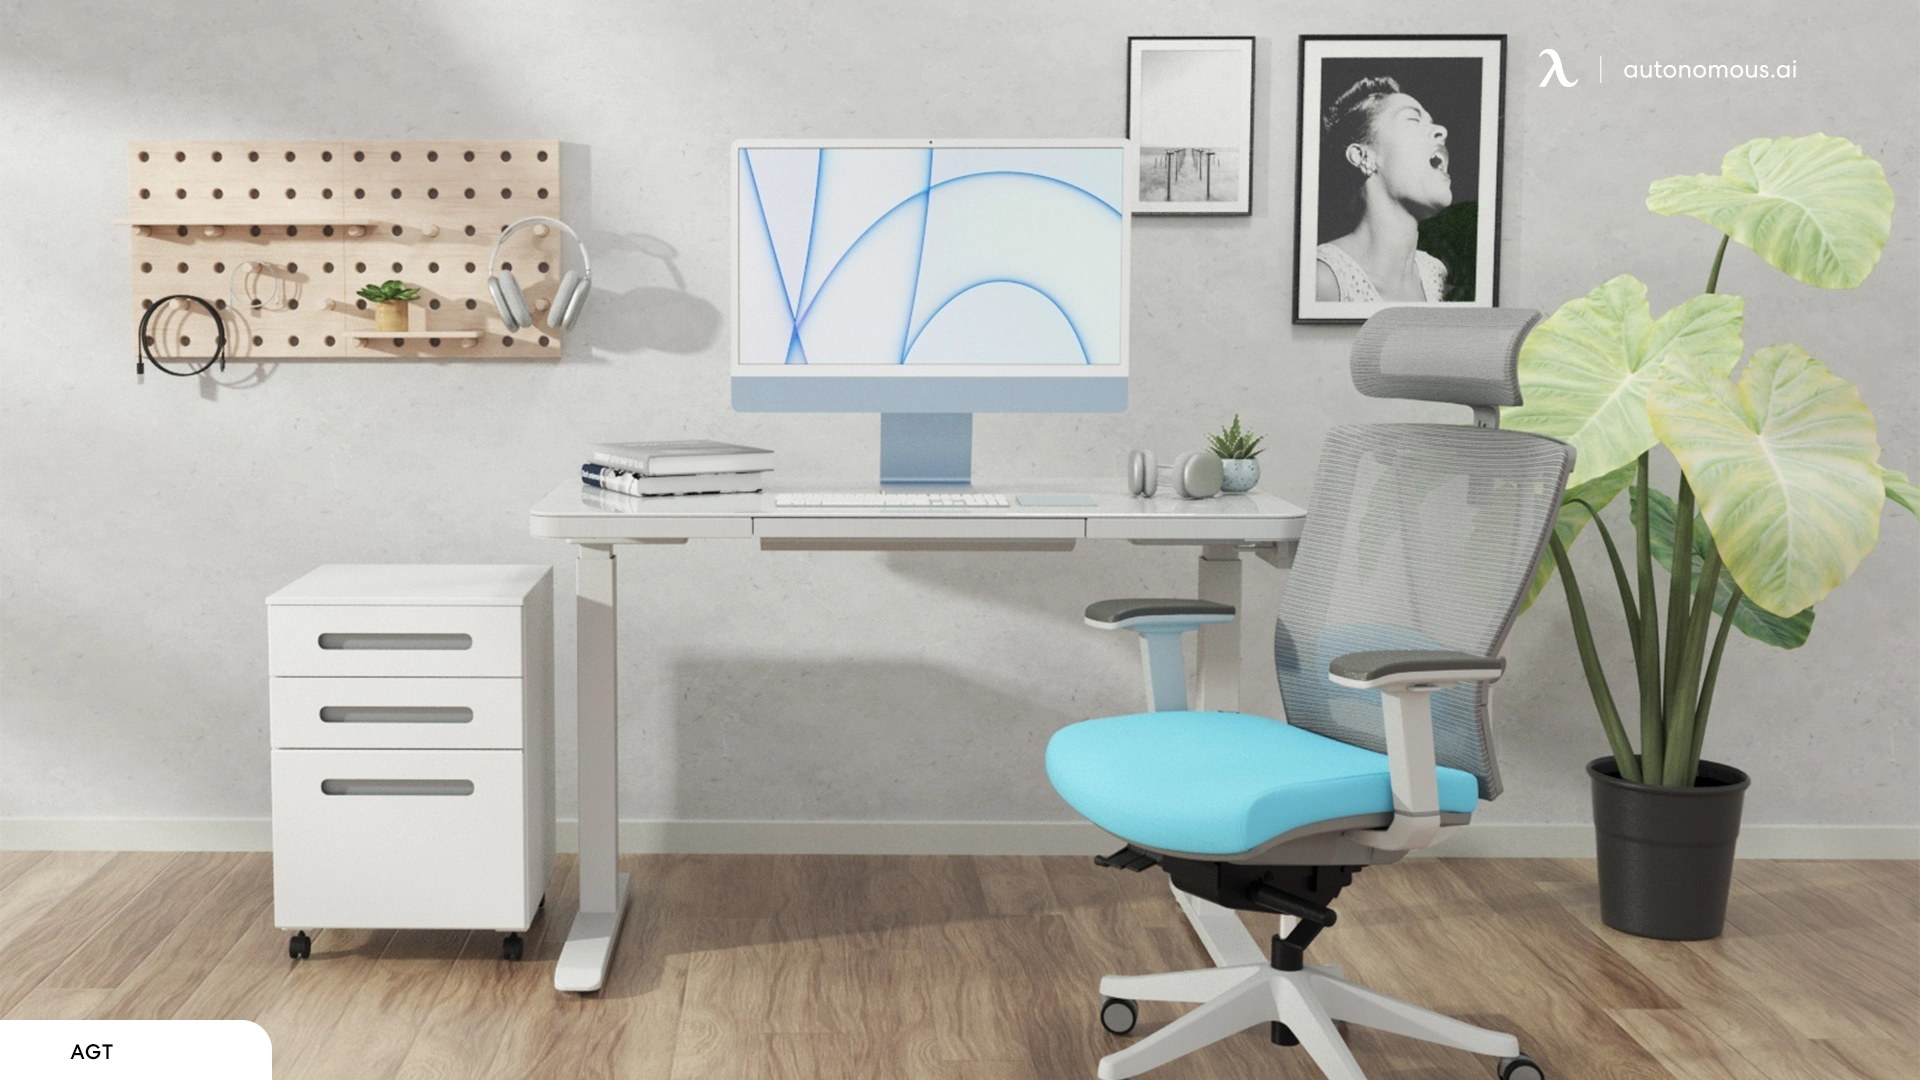 How Can a Desk with Shelves and Drawers Enhance Your Workflow?